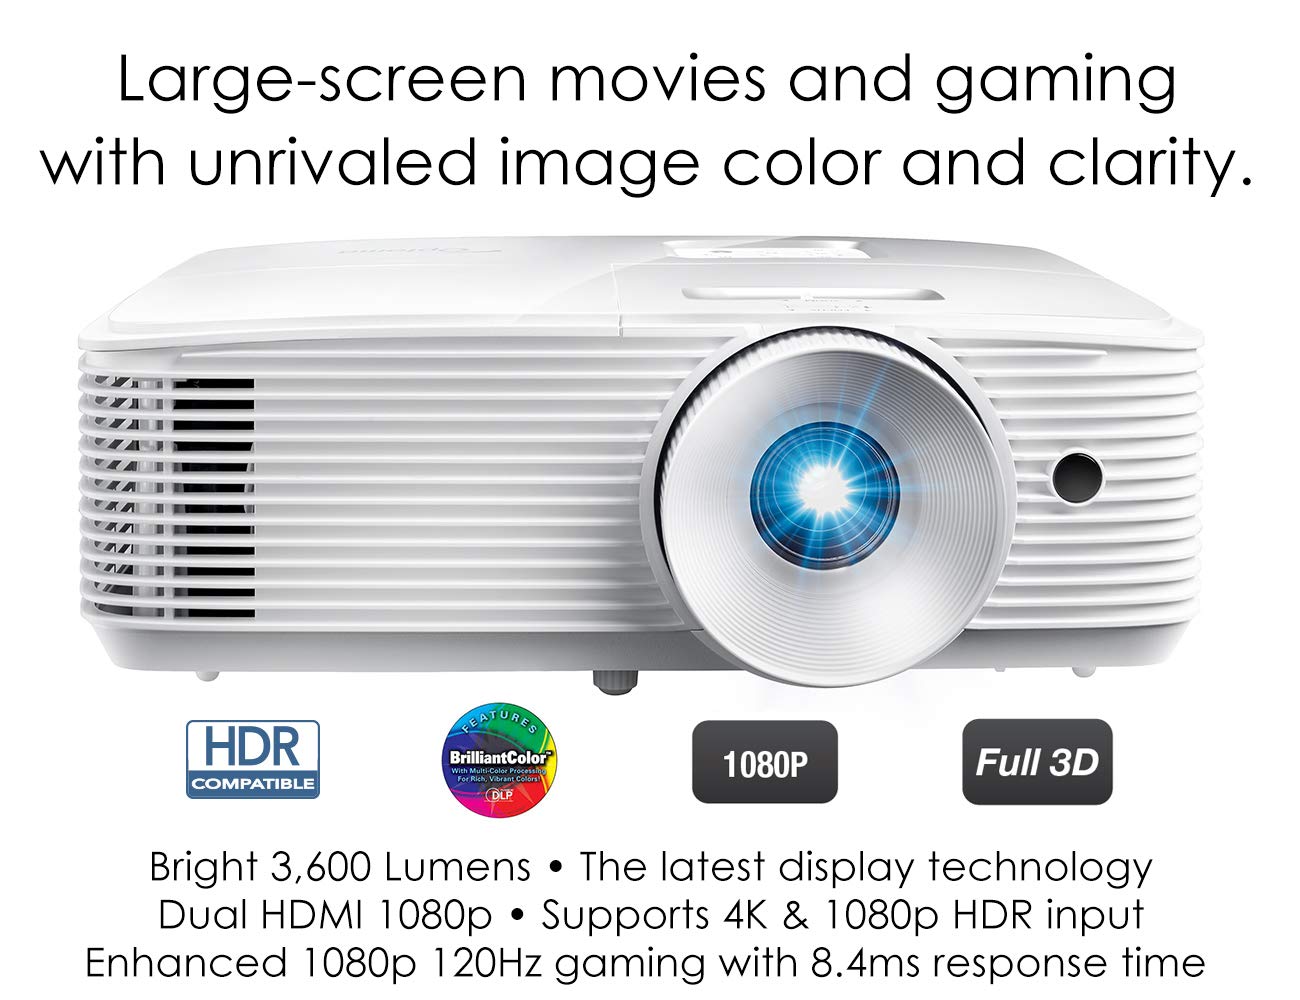 Optoma HD28HDR 1080p Home Theater Projector for Gaming and Movies | Support for 4K Input | HDR Compatible | 120Hz refresh rate | Enhanced Gaming Mode, 8.4ms Response Time | High-Bright 3600 lumens